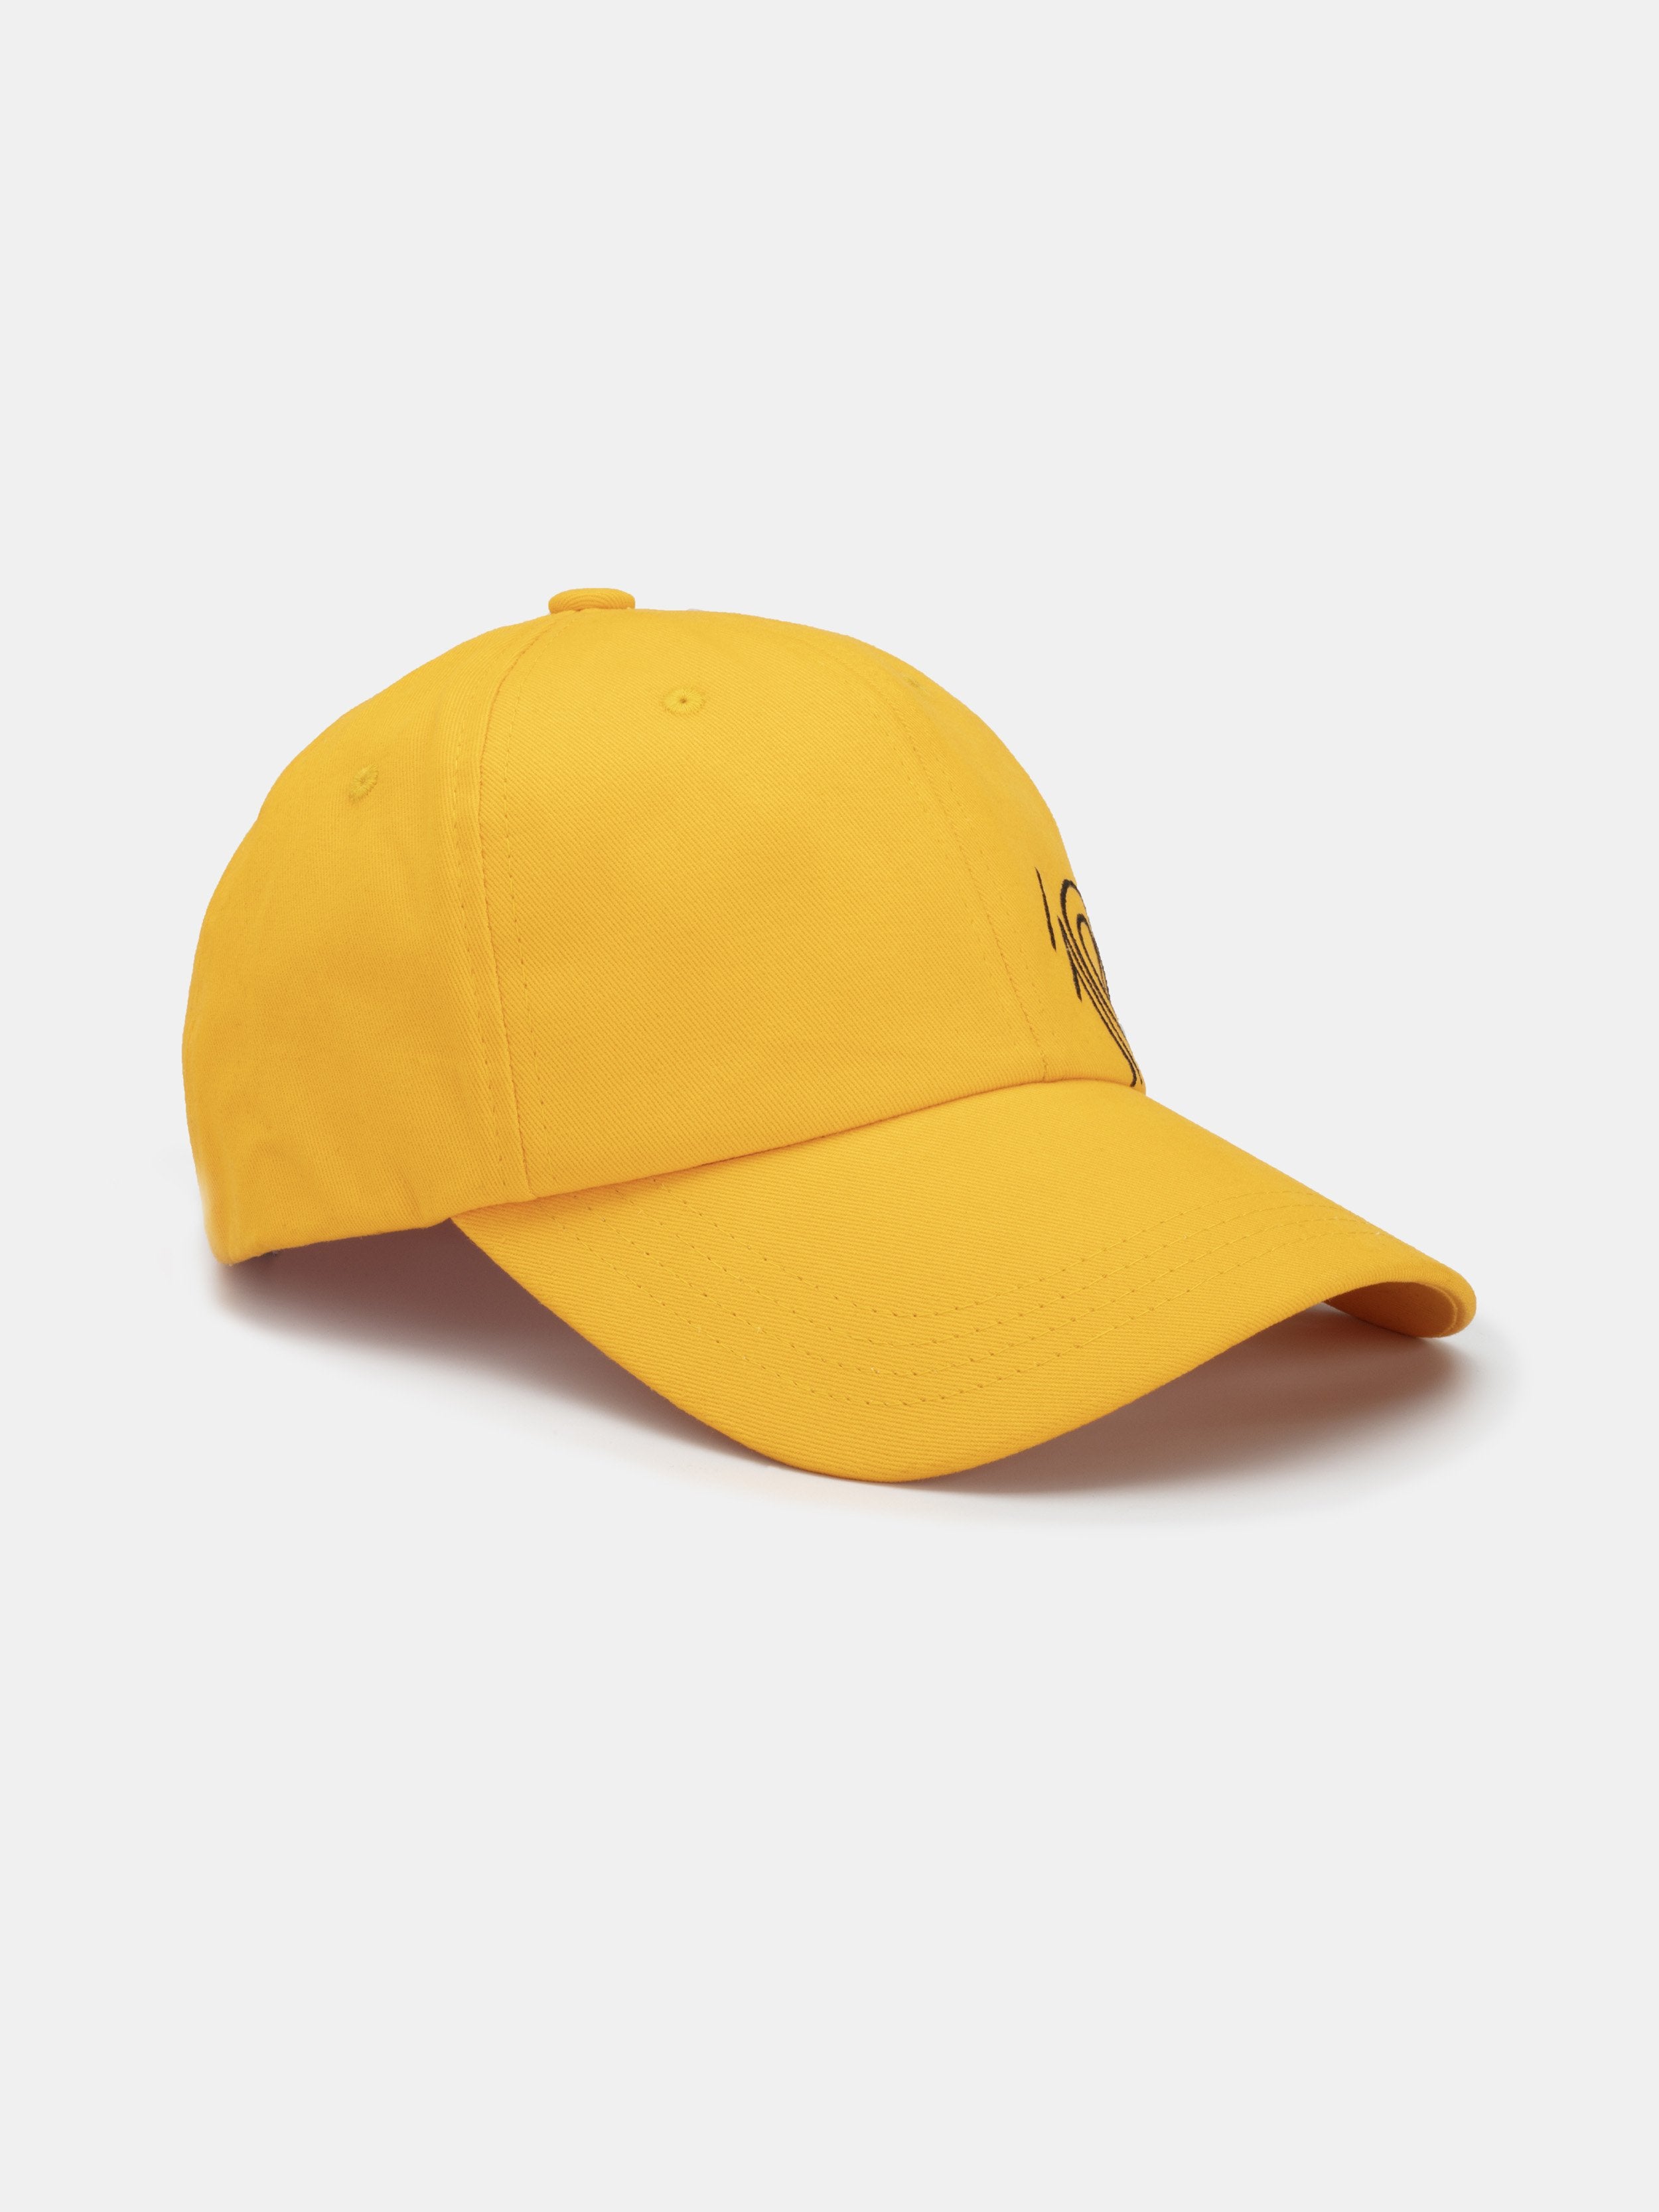 Buy Yellow Embroidered Cap - Summer Caps for Men